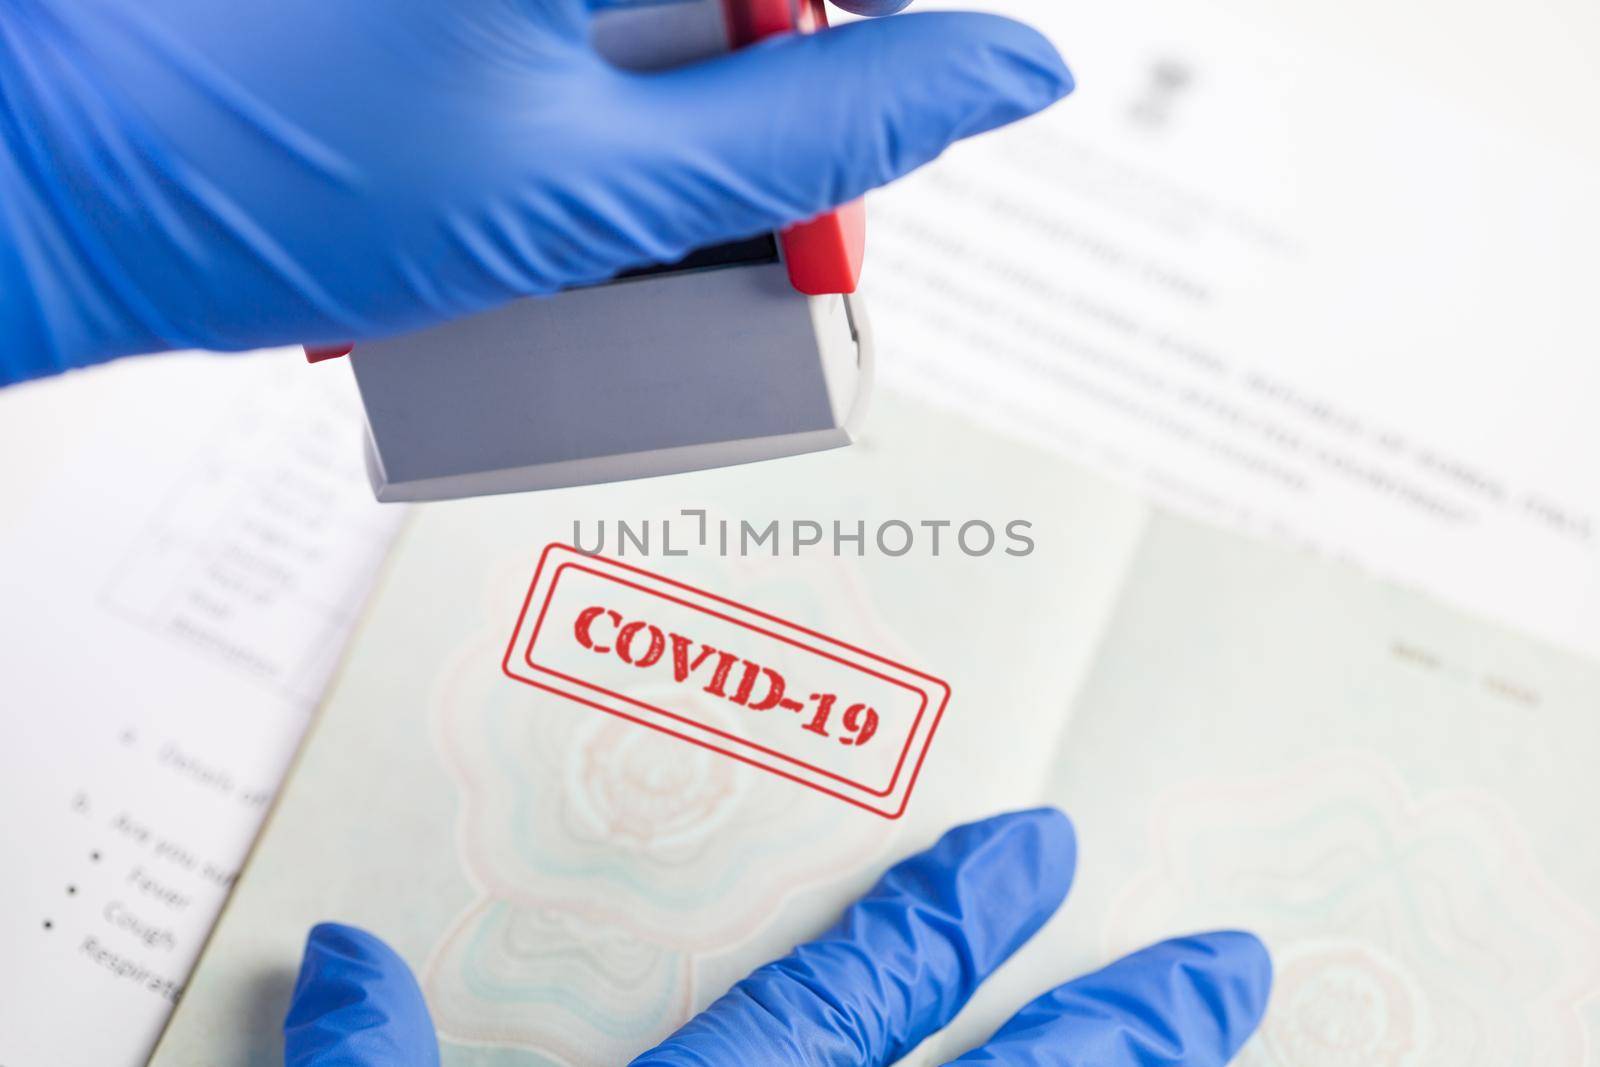 UK border security officer wearing blue protective gloves stamping COVID-19 onto document by Plyushkin